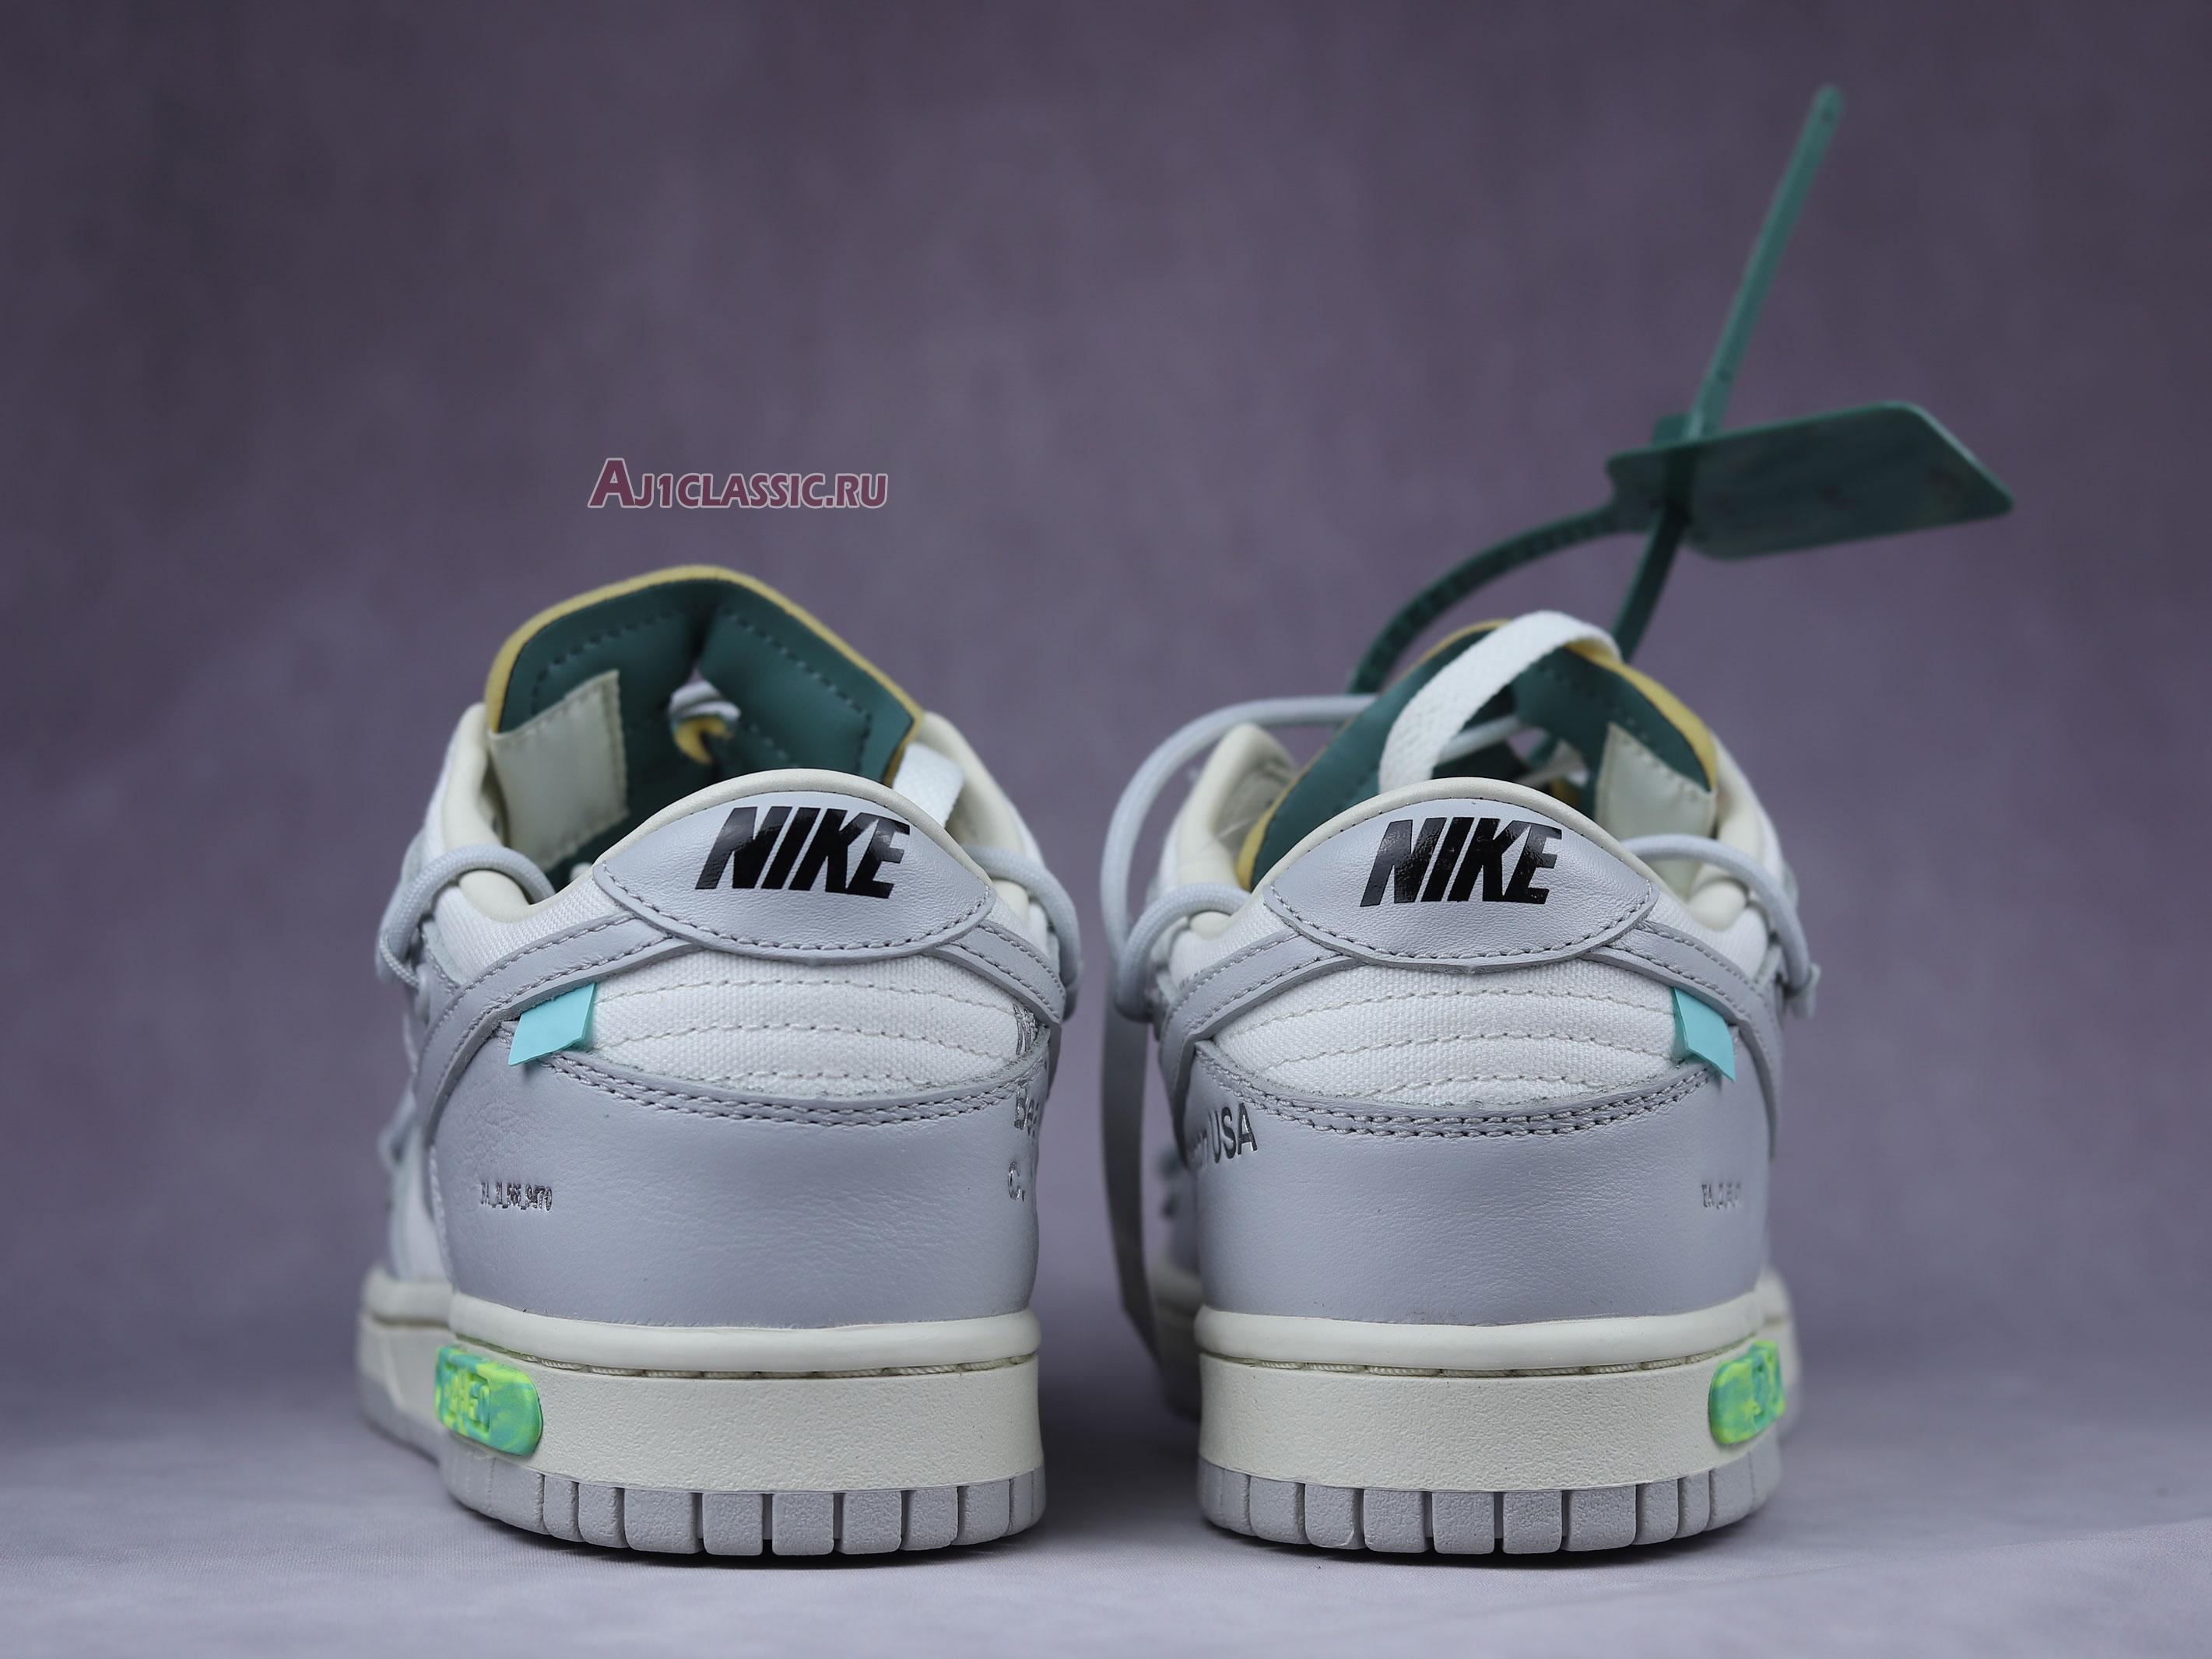 Off-White x Nike Dunk Low "Lot 42 of 50" DM1602-117